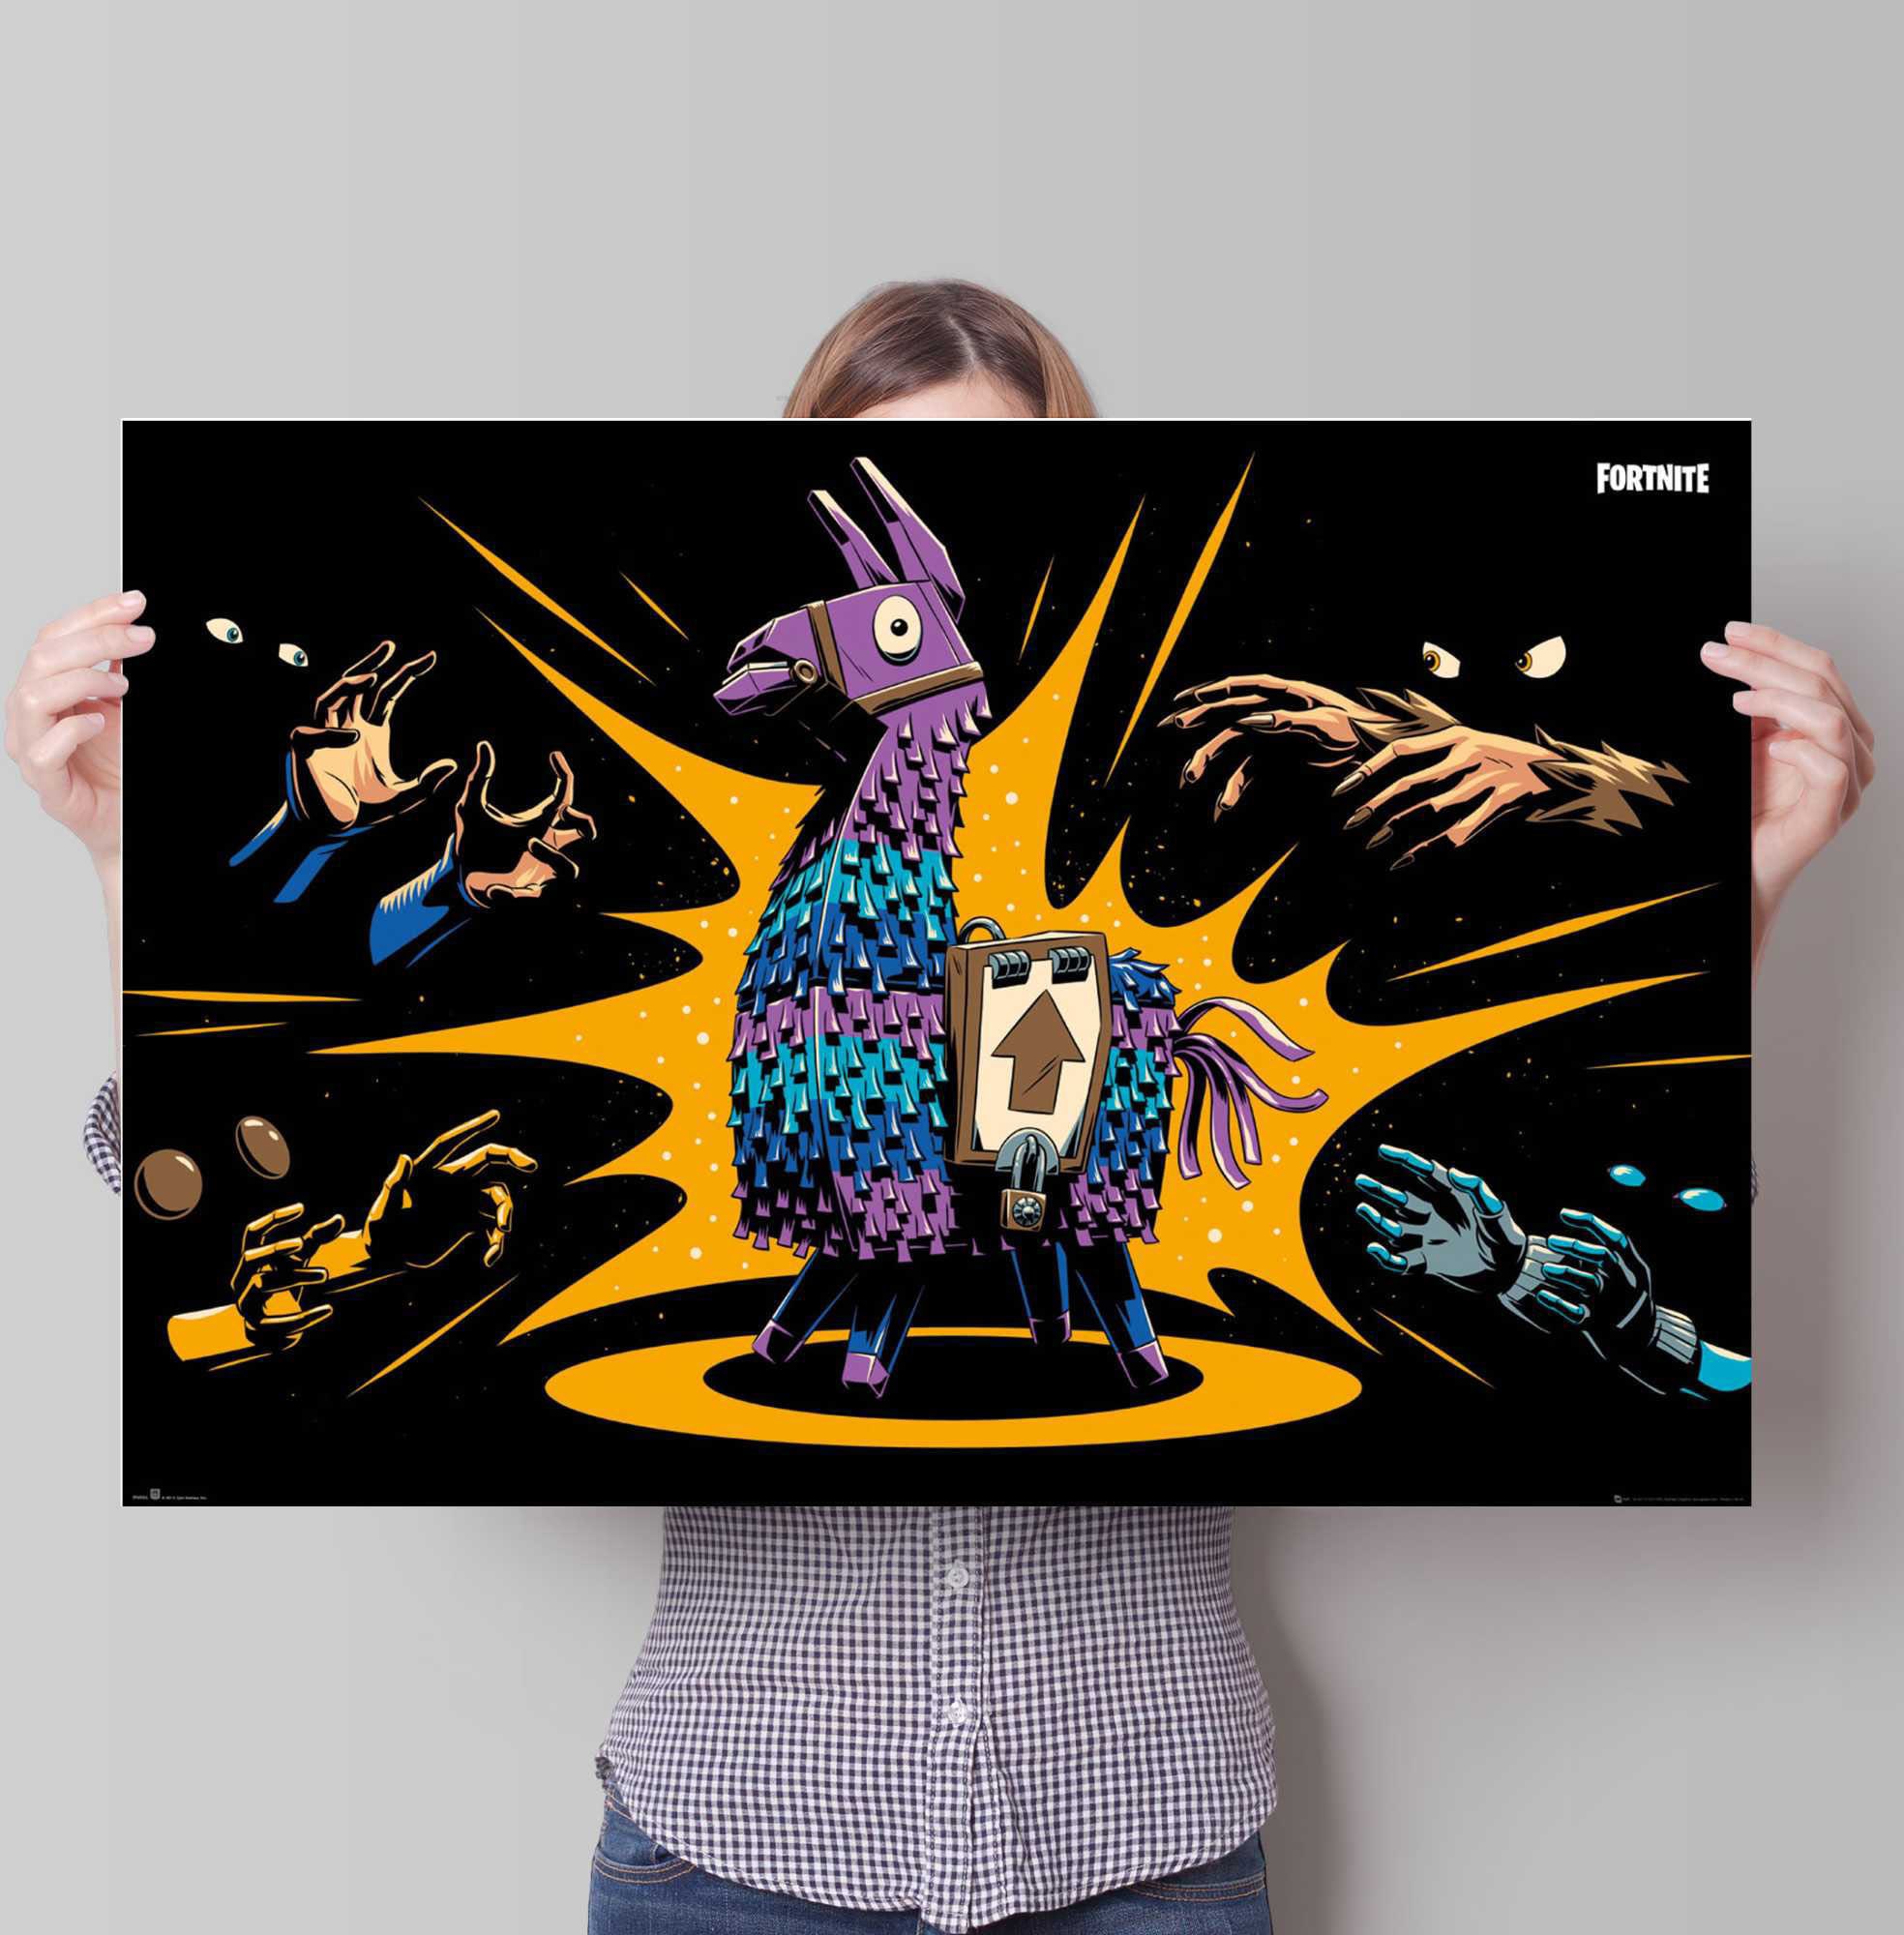 Fortnite bequem (1 Game«, Reinders! Loot - Llama kaufen Poster St.) Spiele, »Poster